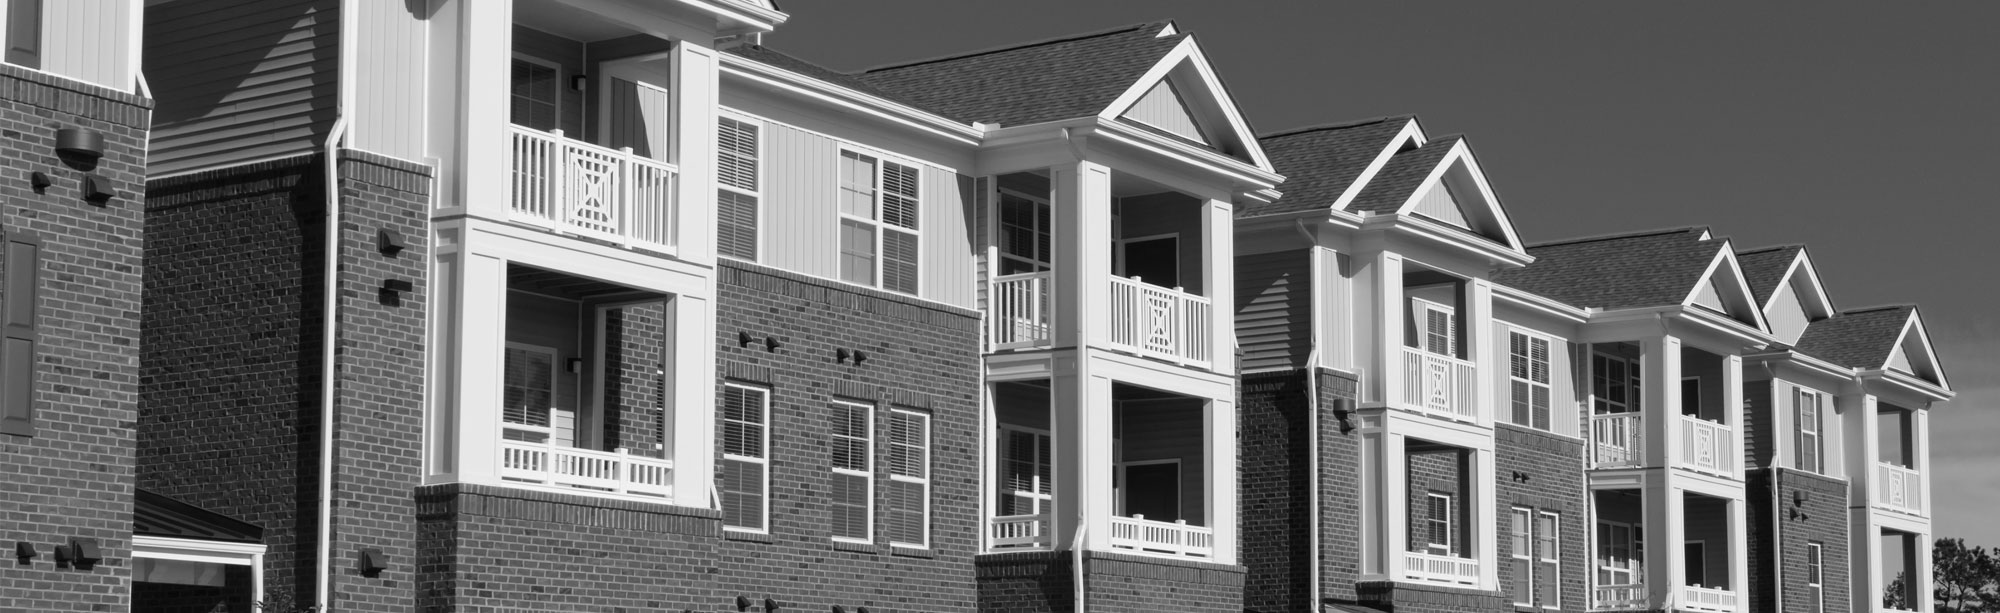 High Point Multi-Family Property Management